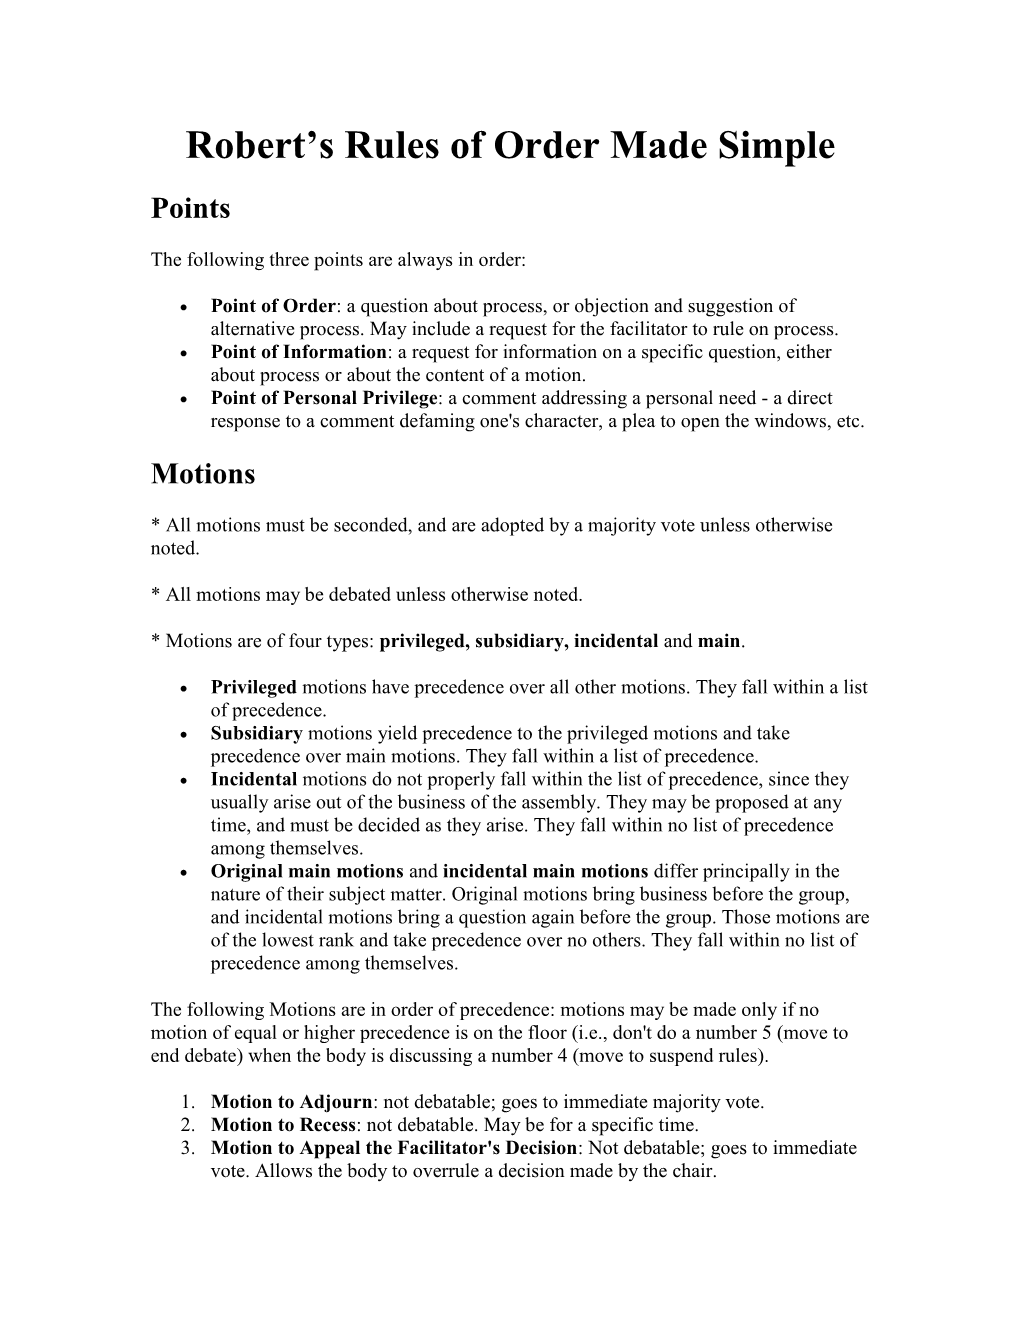 Robert's Rules of Order Made Simple